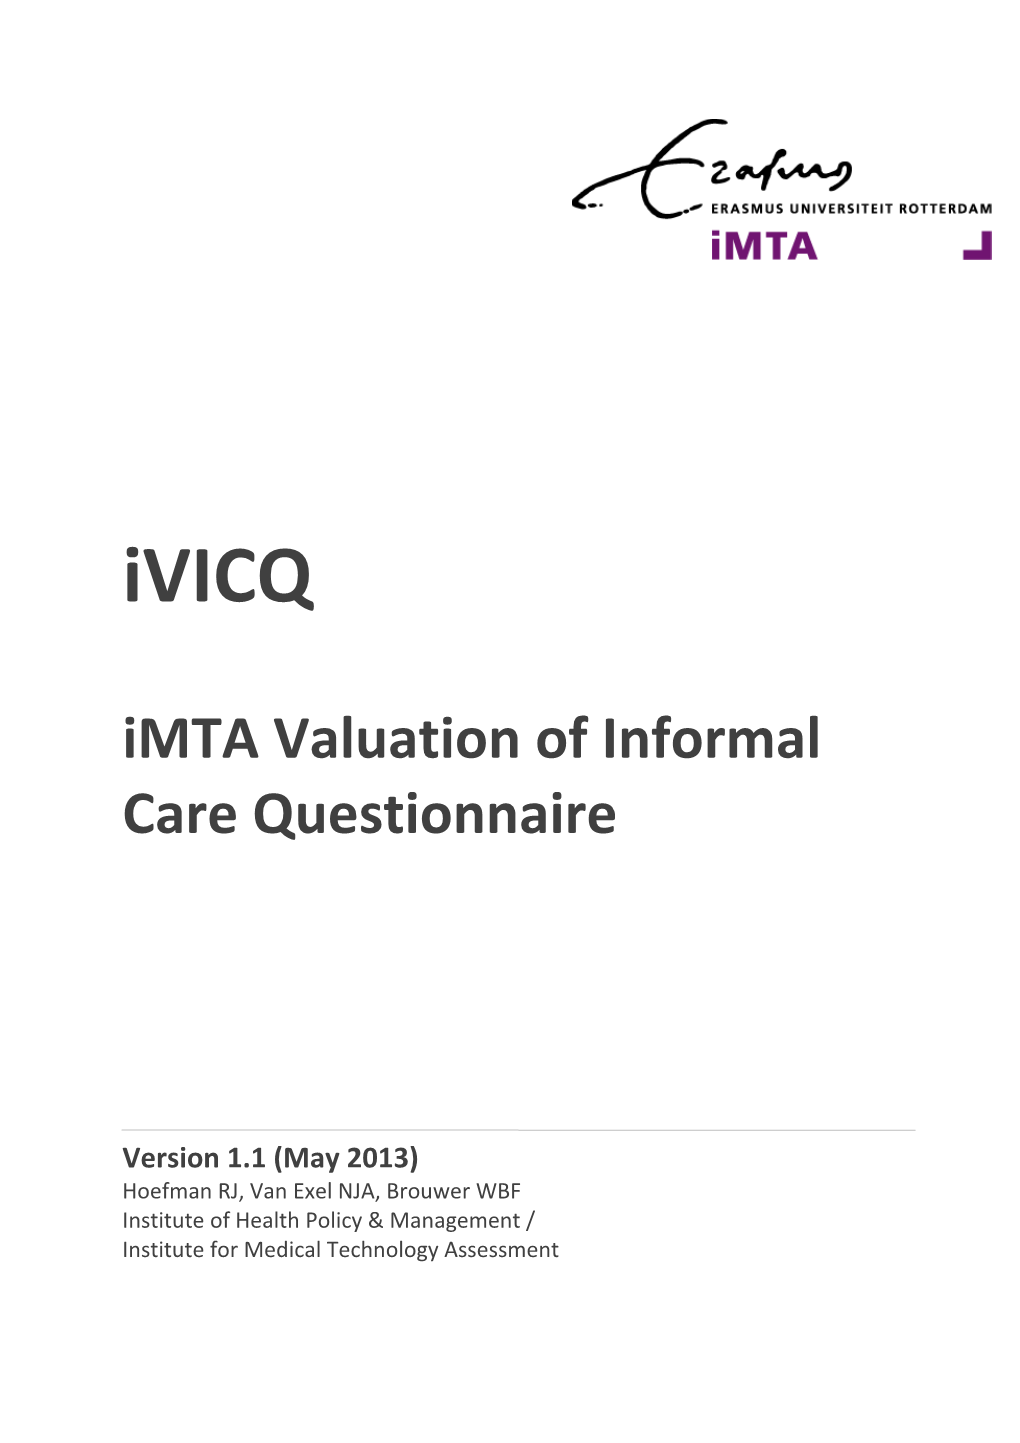 Imta Valuation of Informal Care Questionnaire